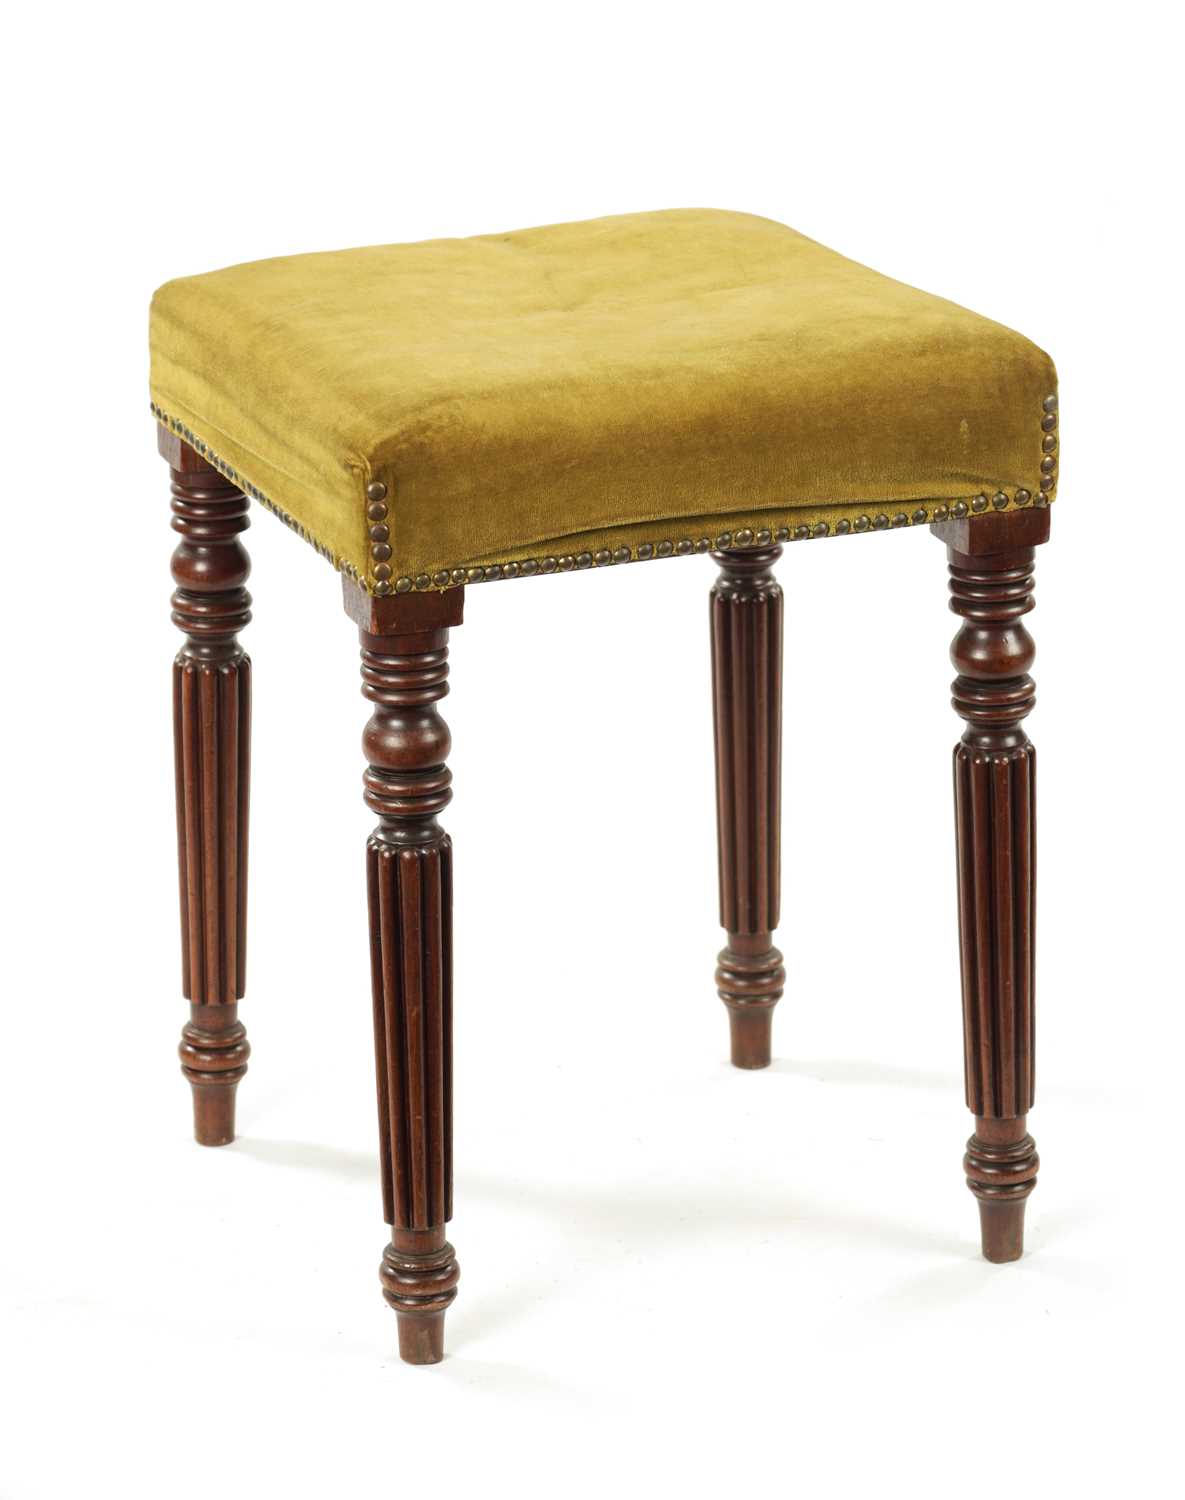 A WILLIAM IV MAHOGANY UPHOLSTERED STOOL IN THE MANNER OF GILLOWS